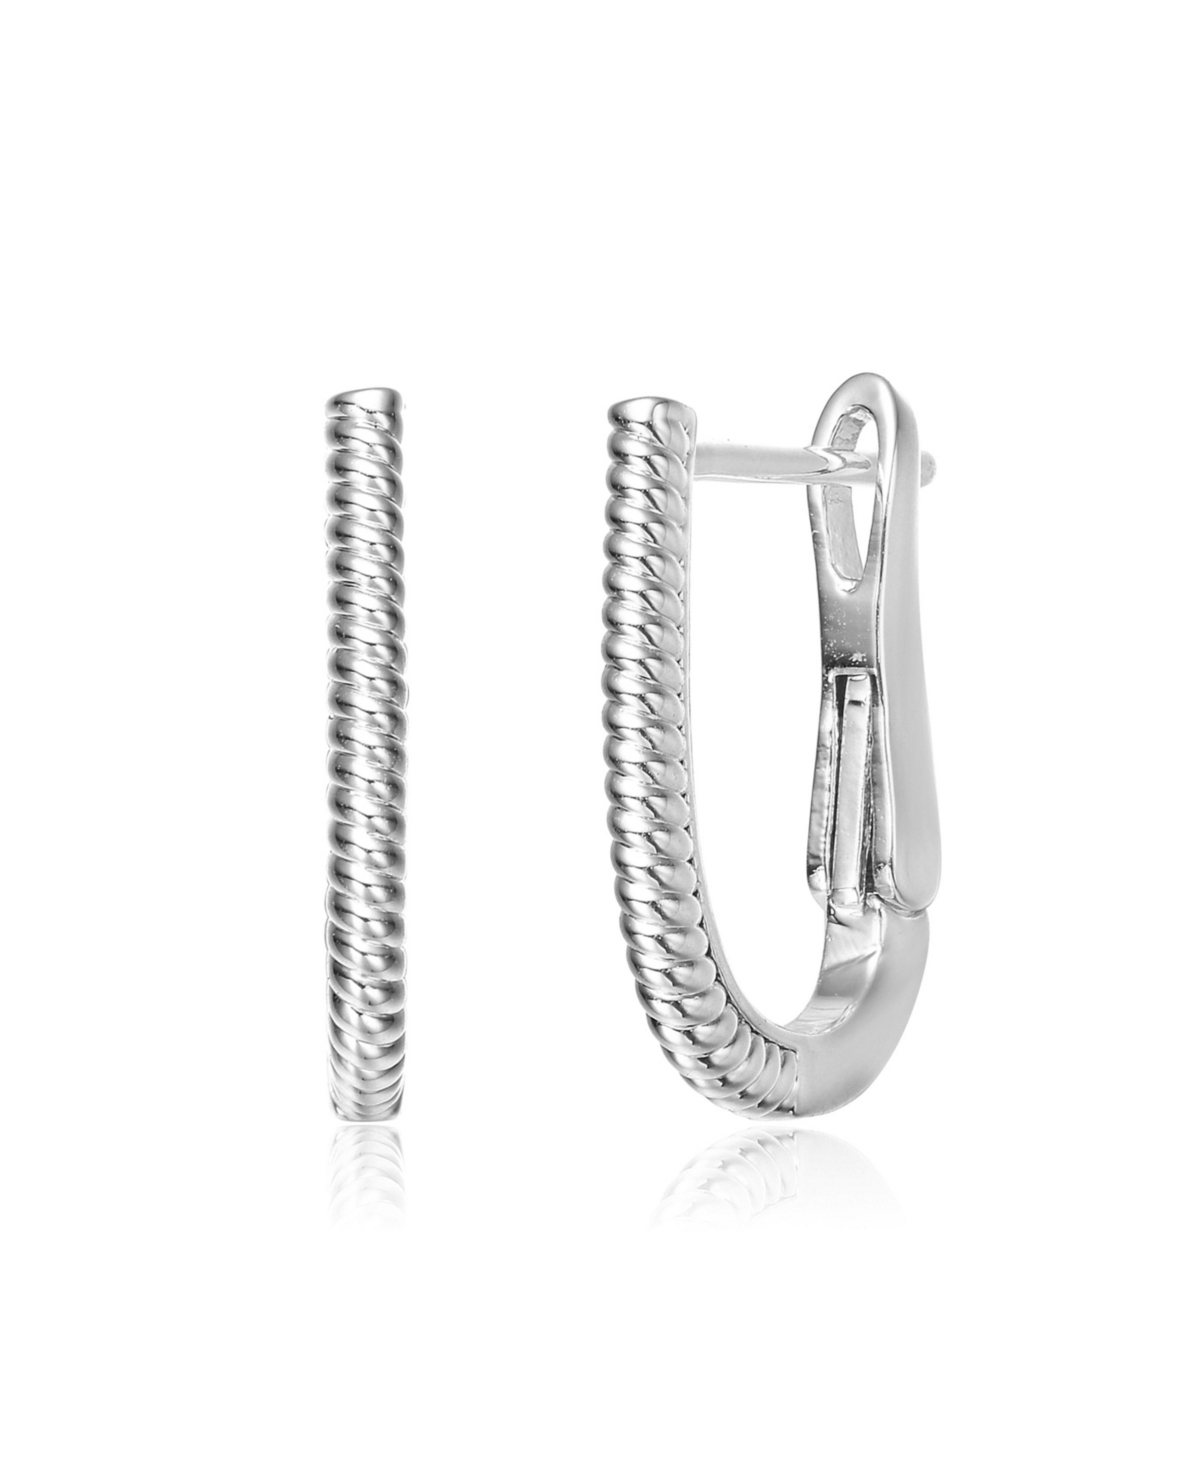 White Gold Plated "U" Small Hoop Earrings for Teens - Silver